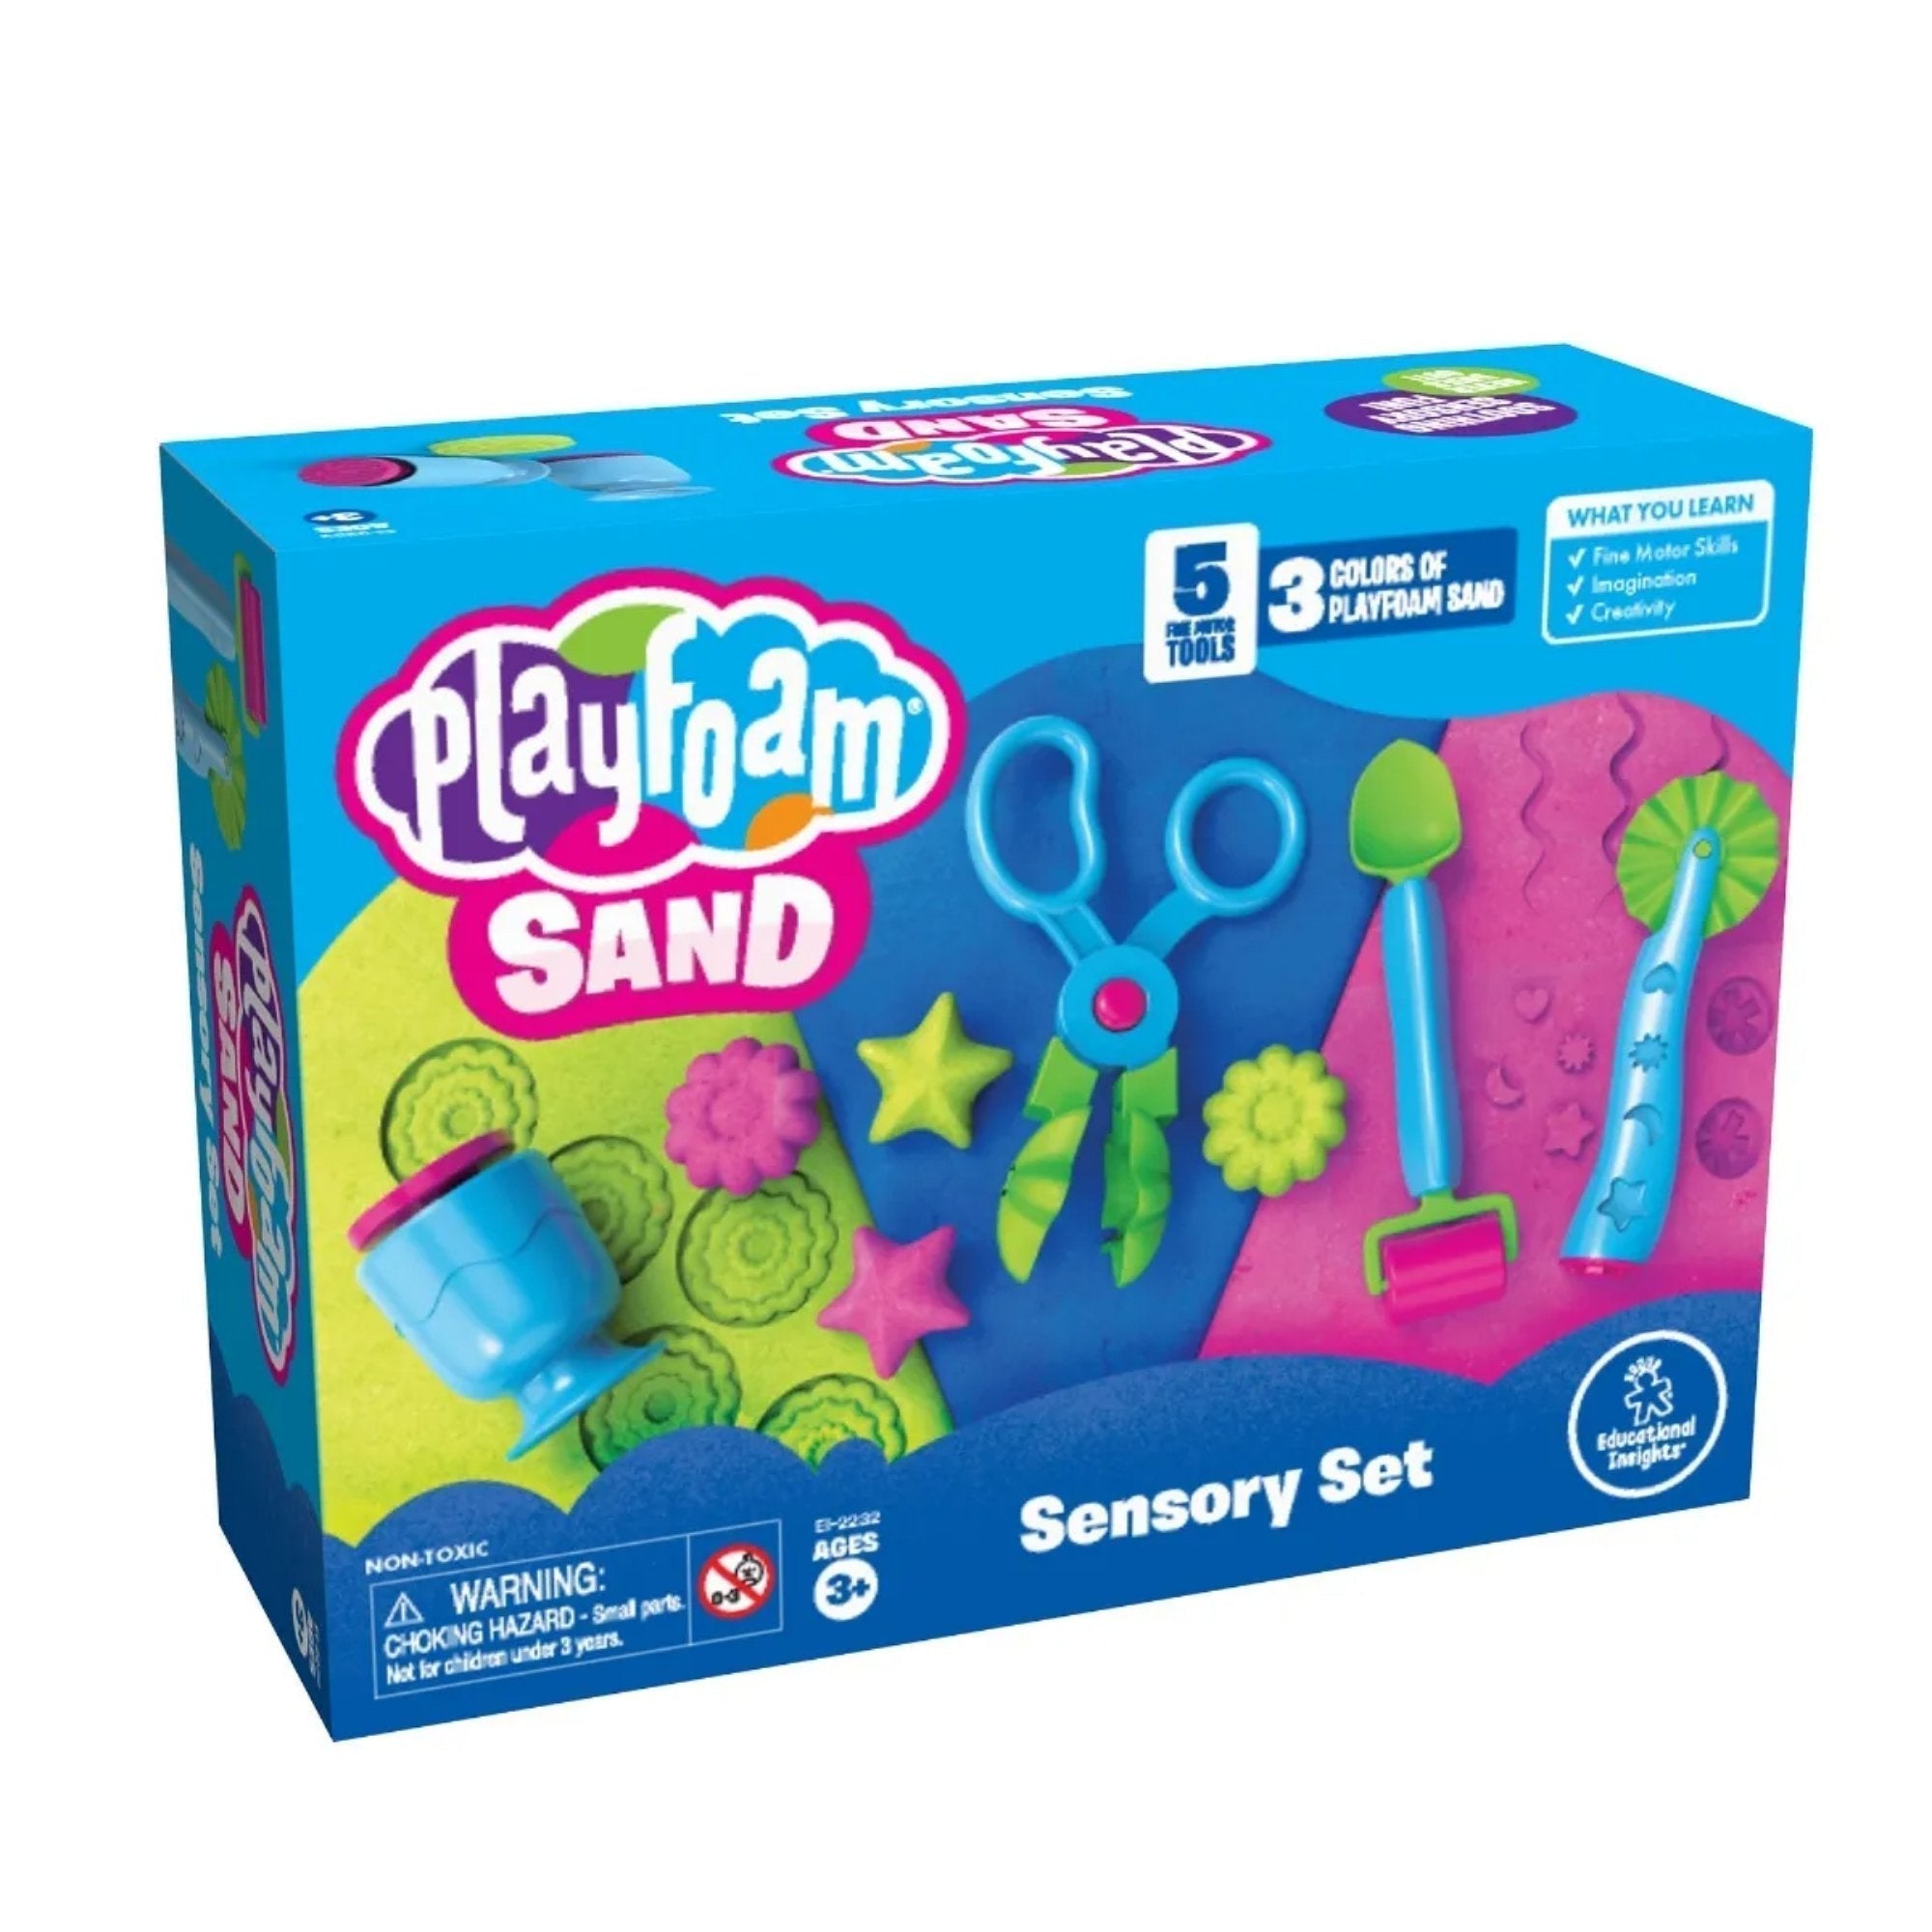 Playfoam Sand Sensory Set, Dig into fine motor skills development with Playfoam® Sand Sensory Set. Super soft Playfoam Sand behaves like wet sand when it’s moulded, and sculpted, and like dry sand when it’s sifted and squished. It’s perfect for sensory sand play anywhere, anytime! Dig into soft sensory and fine motor skills play with this Playfoam Sand Sensory Set that includes 4 kinds of fine motor tools children can use to scoop, shape, mould, cut, and sculpt. Perfect for sensory sand play, anywhere, anyt